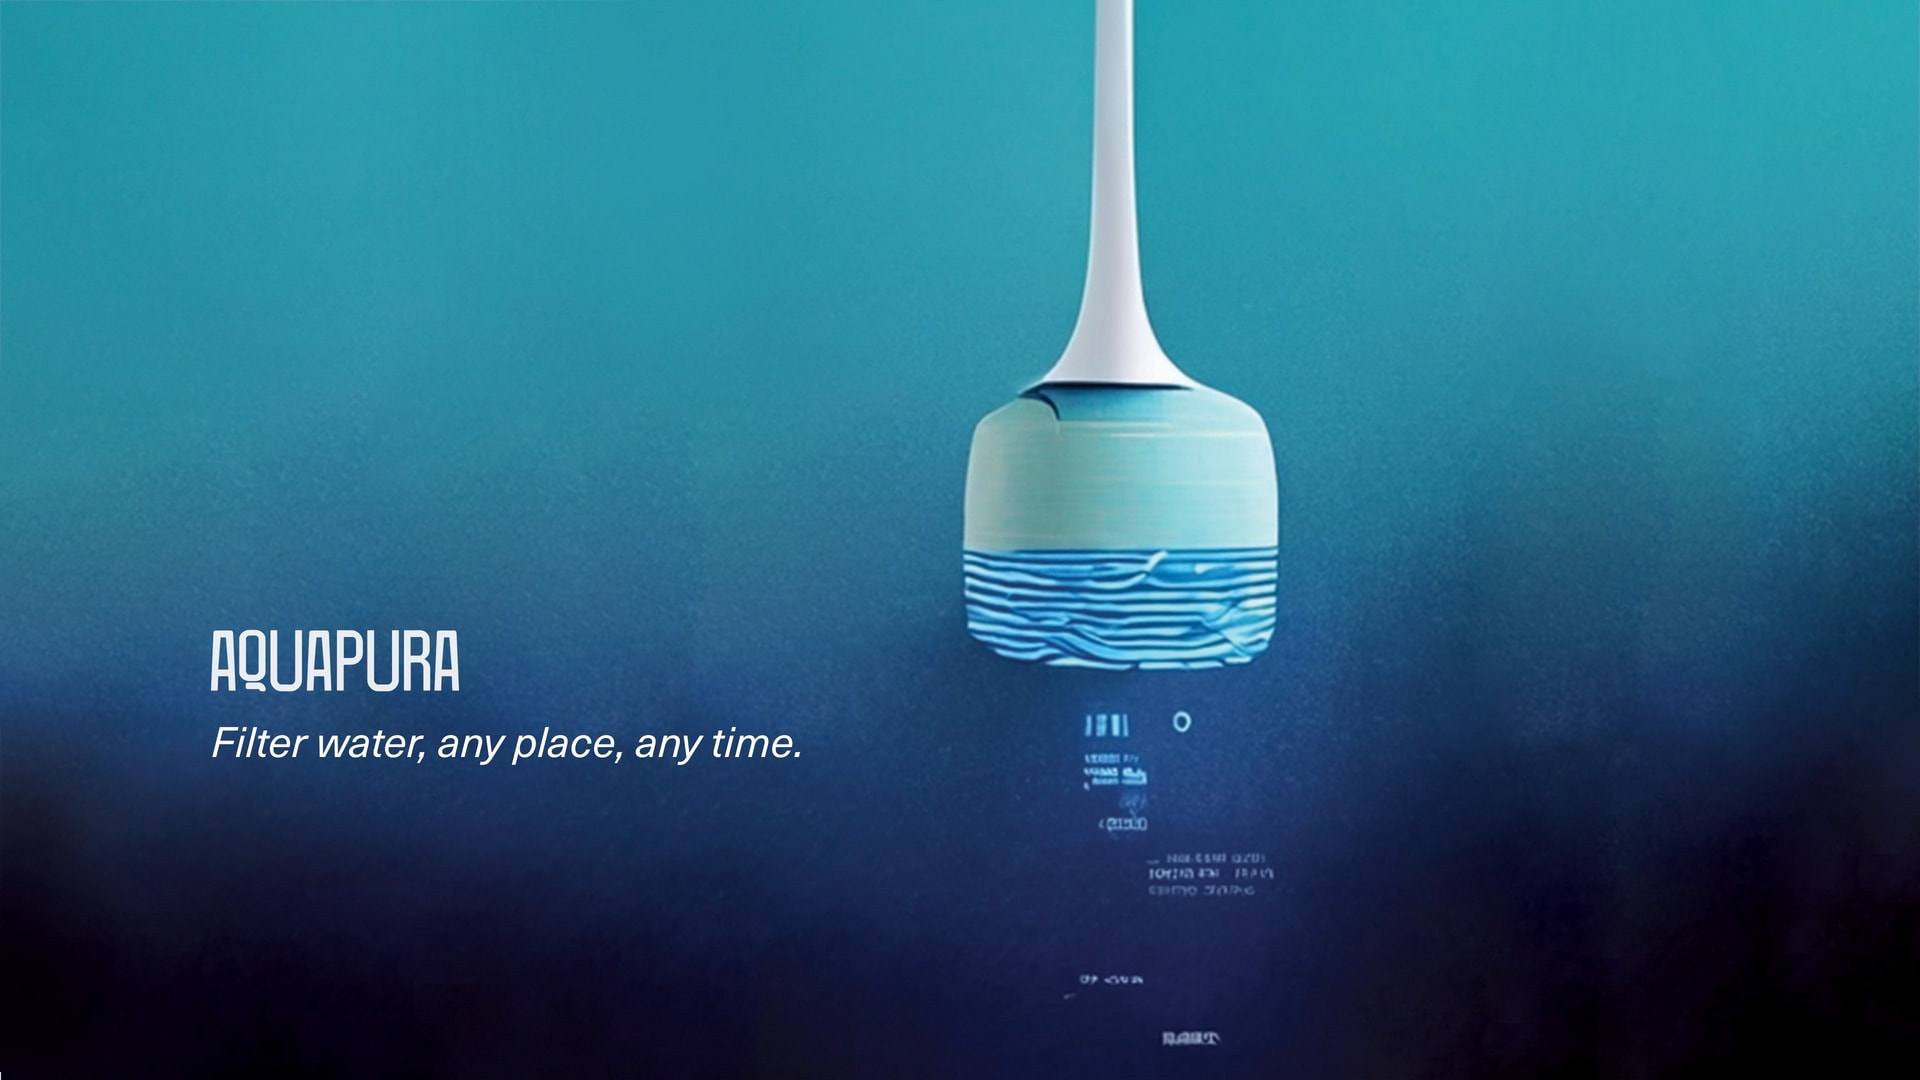 Aquapura: filter water, any place, any time.